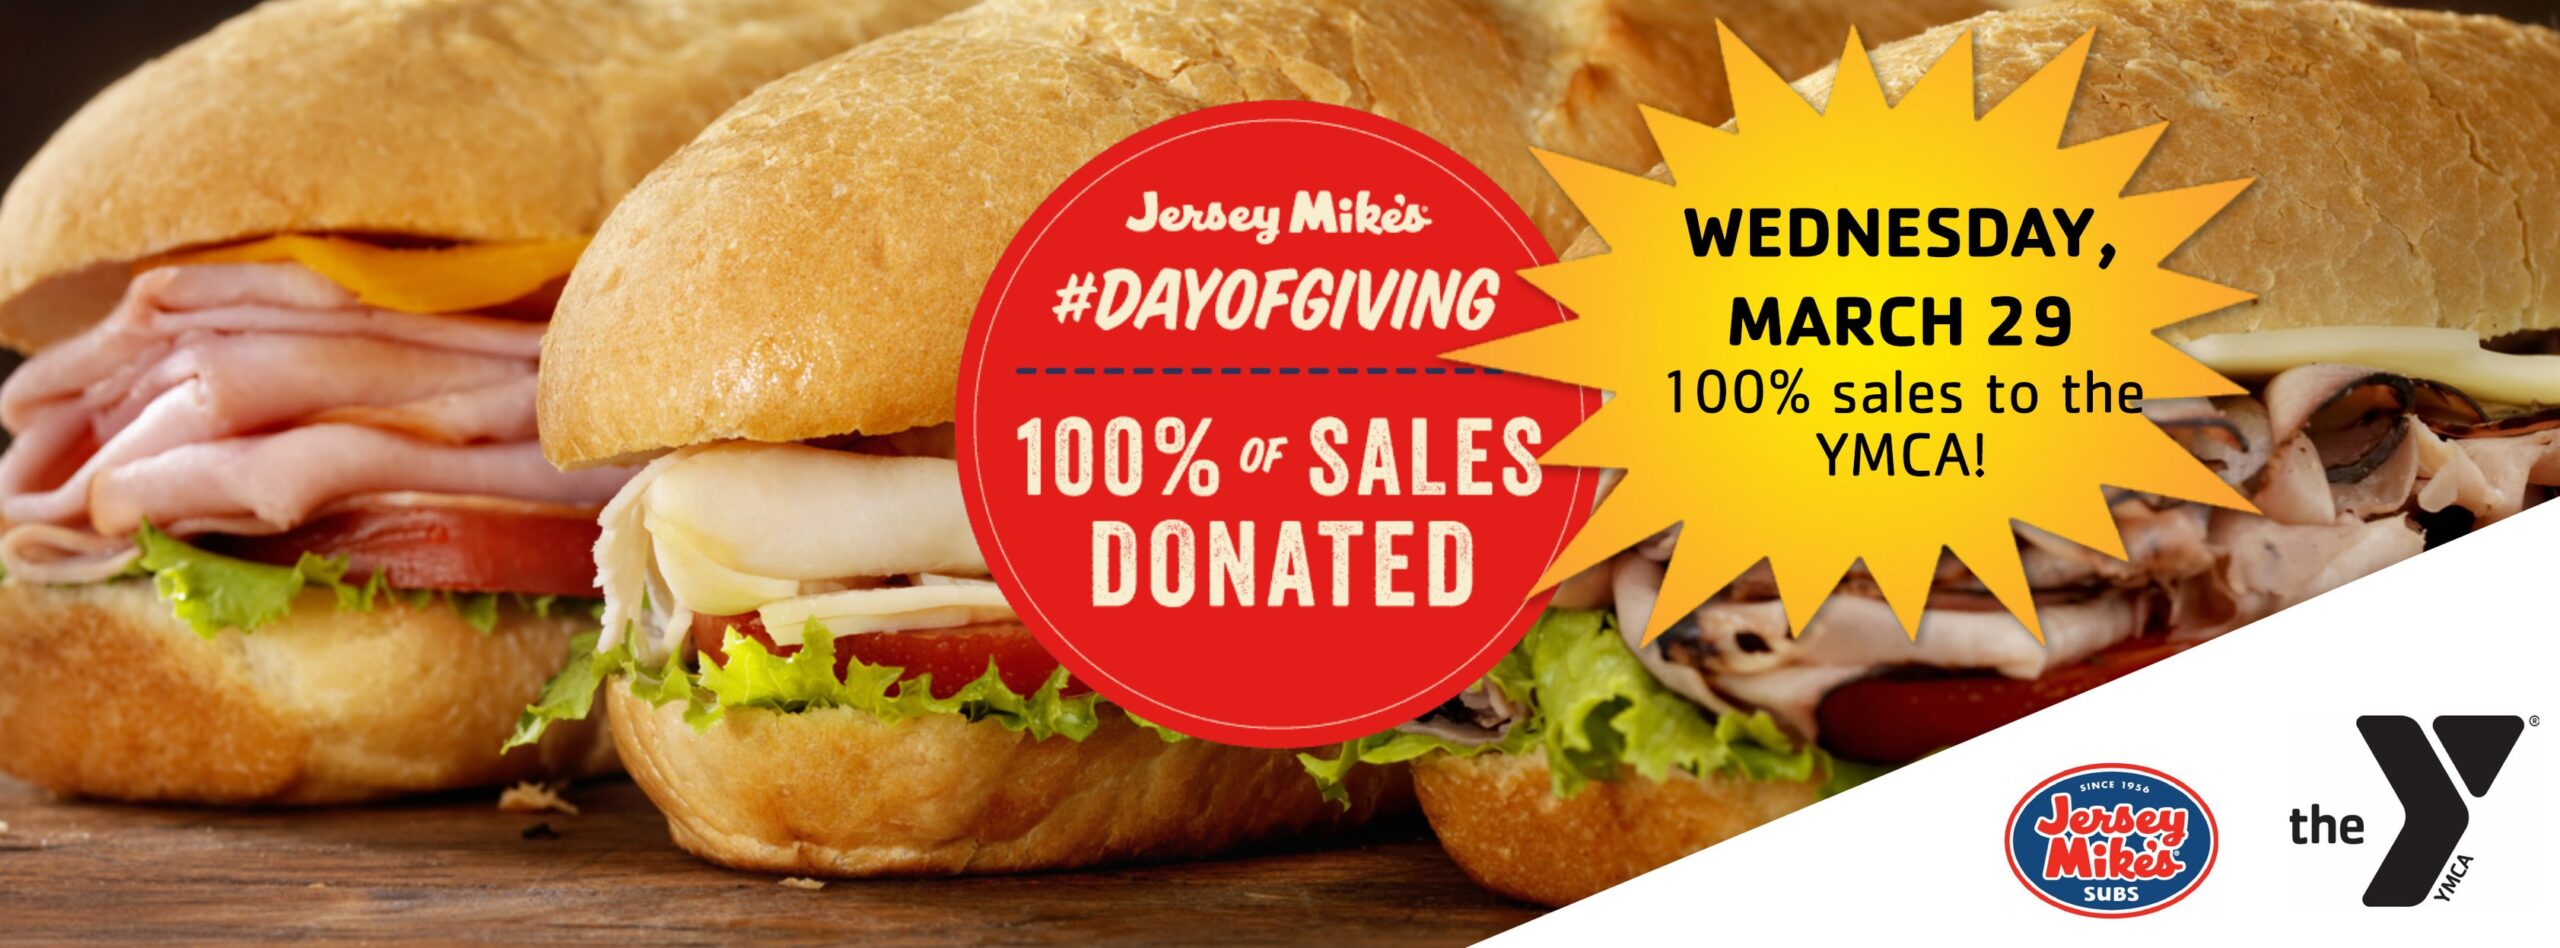 YMCA Day of Giving with Jersey Mike’s Mix 104.1 FM WCLE